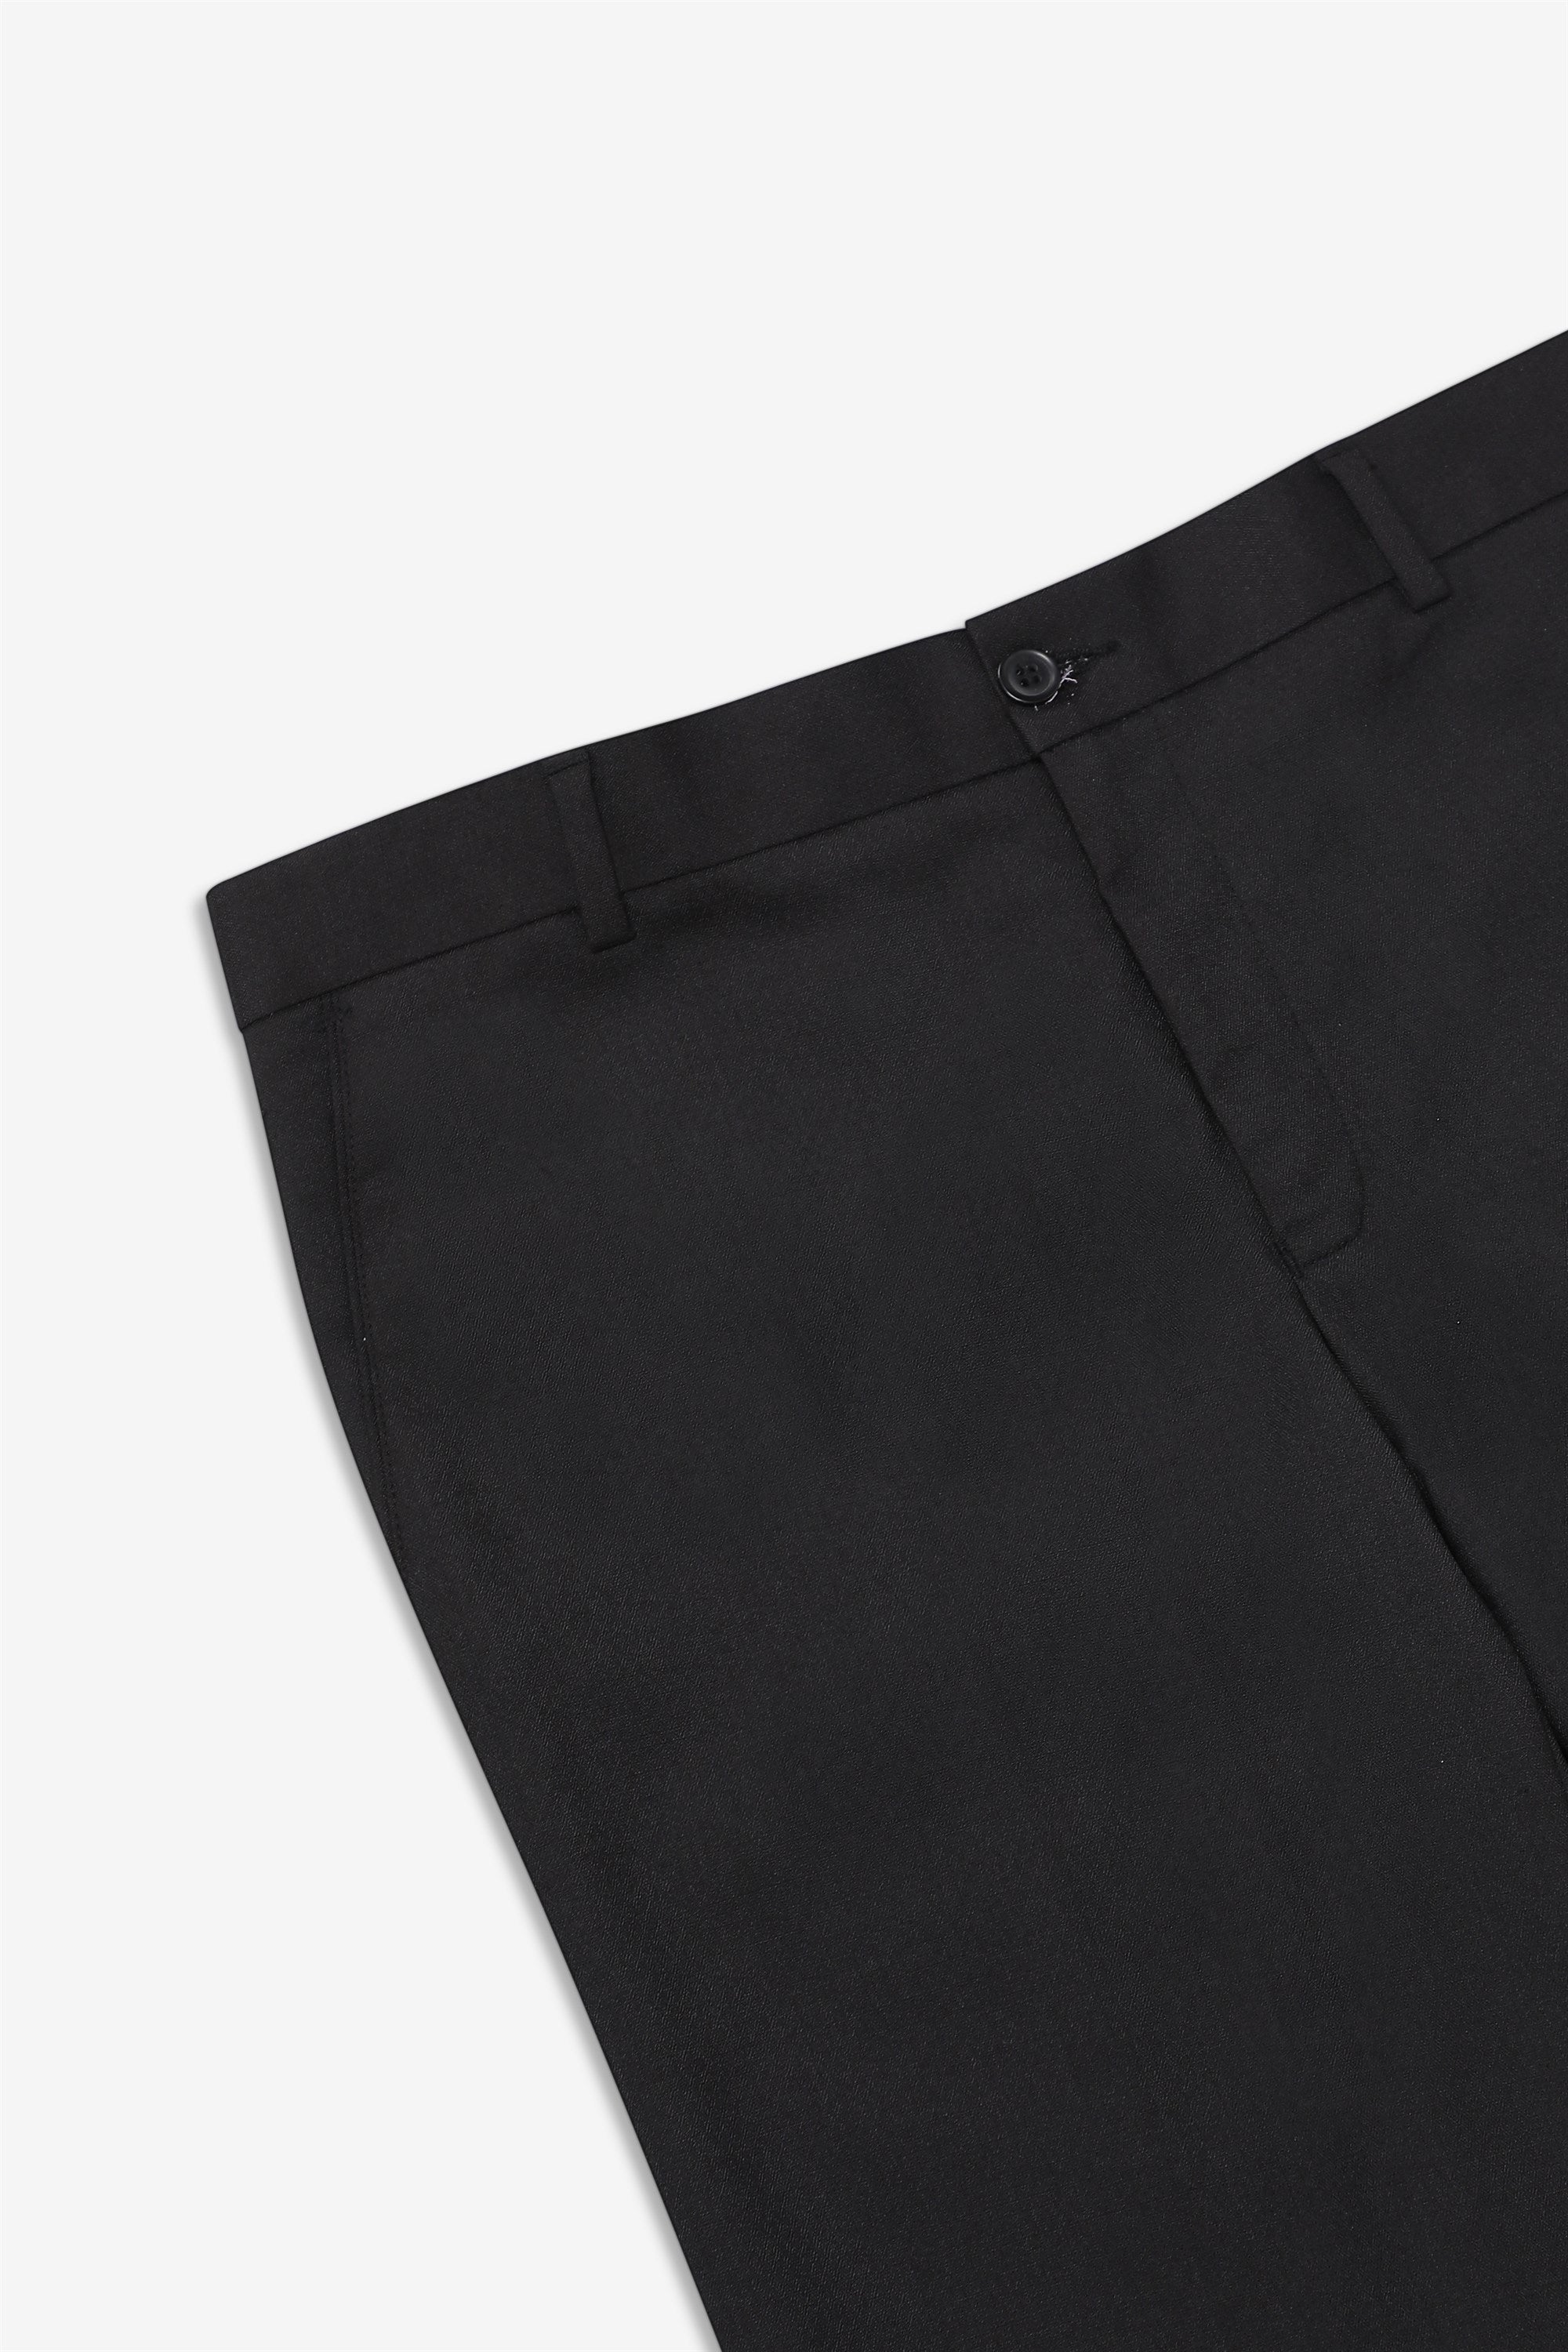 T the brand Stretch Formal Flat Front Trouser - Black